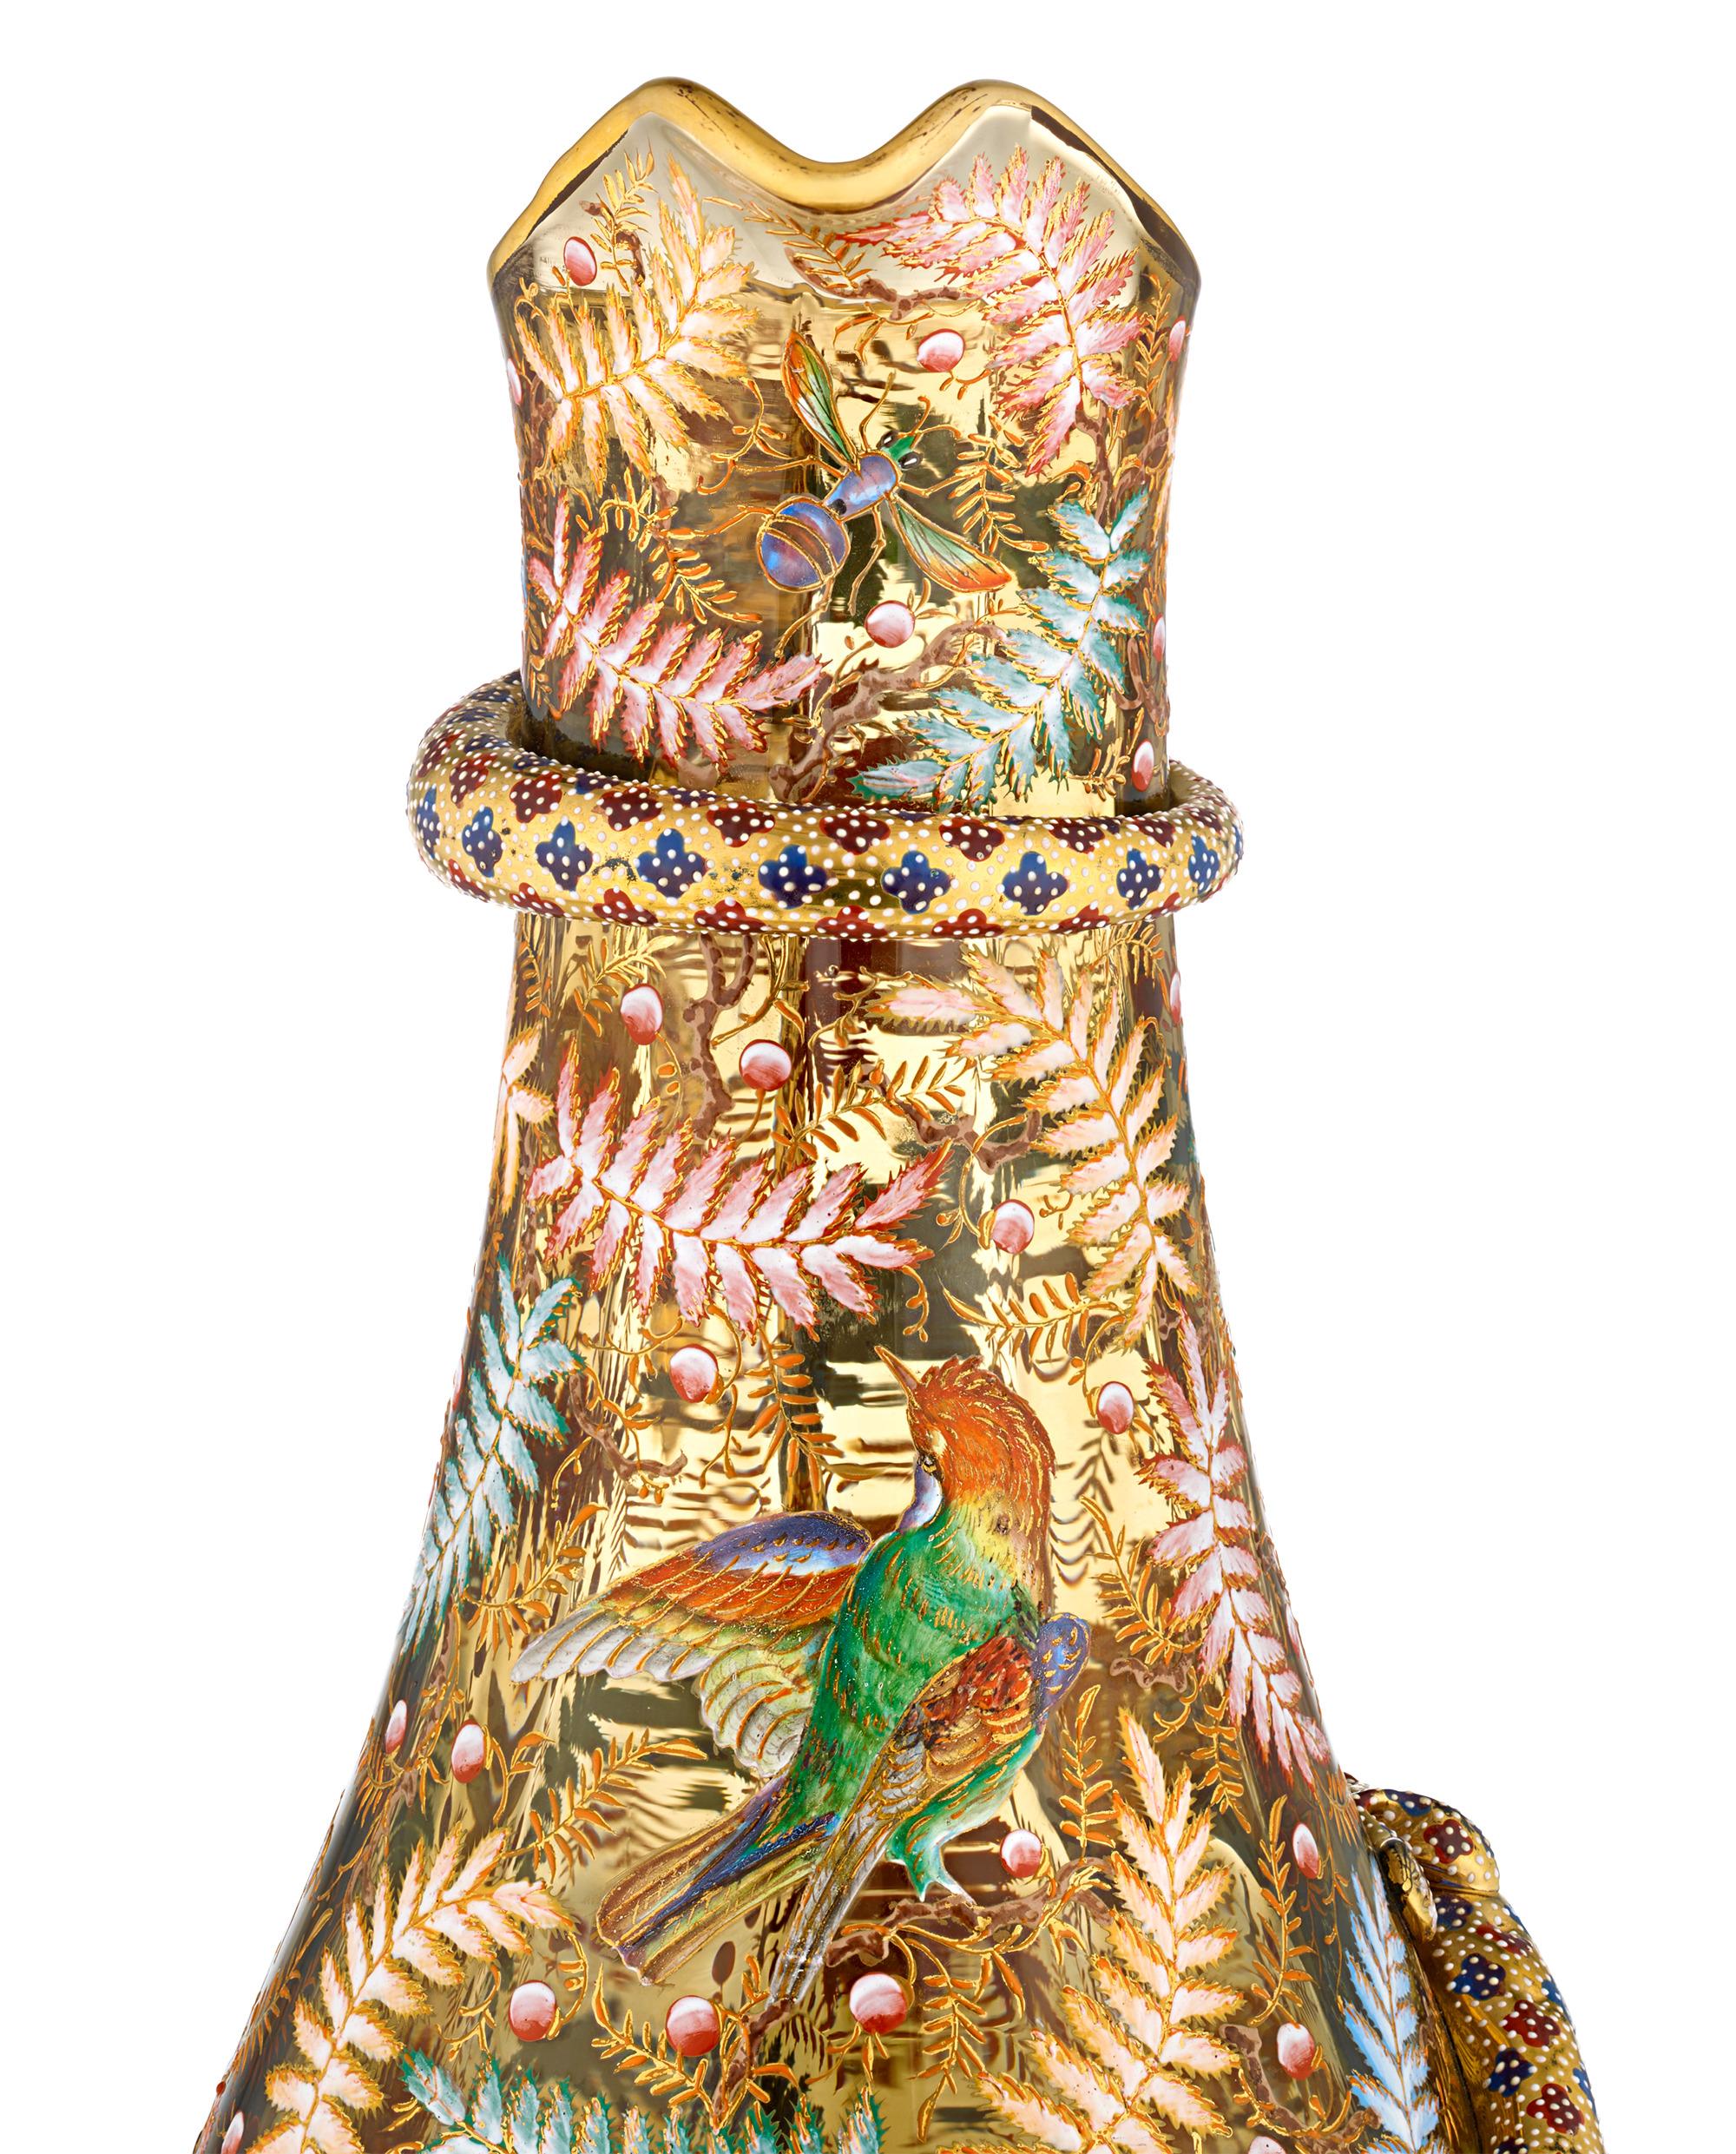 Bohemian Moser Pitcher With Enameled Bird And Salamander For Sale